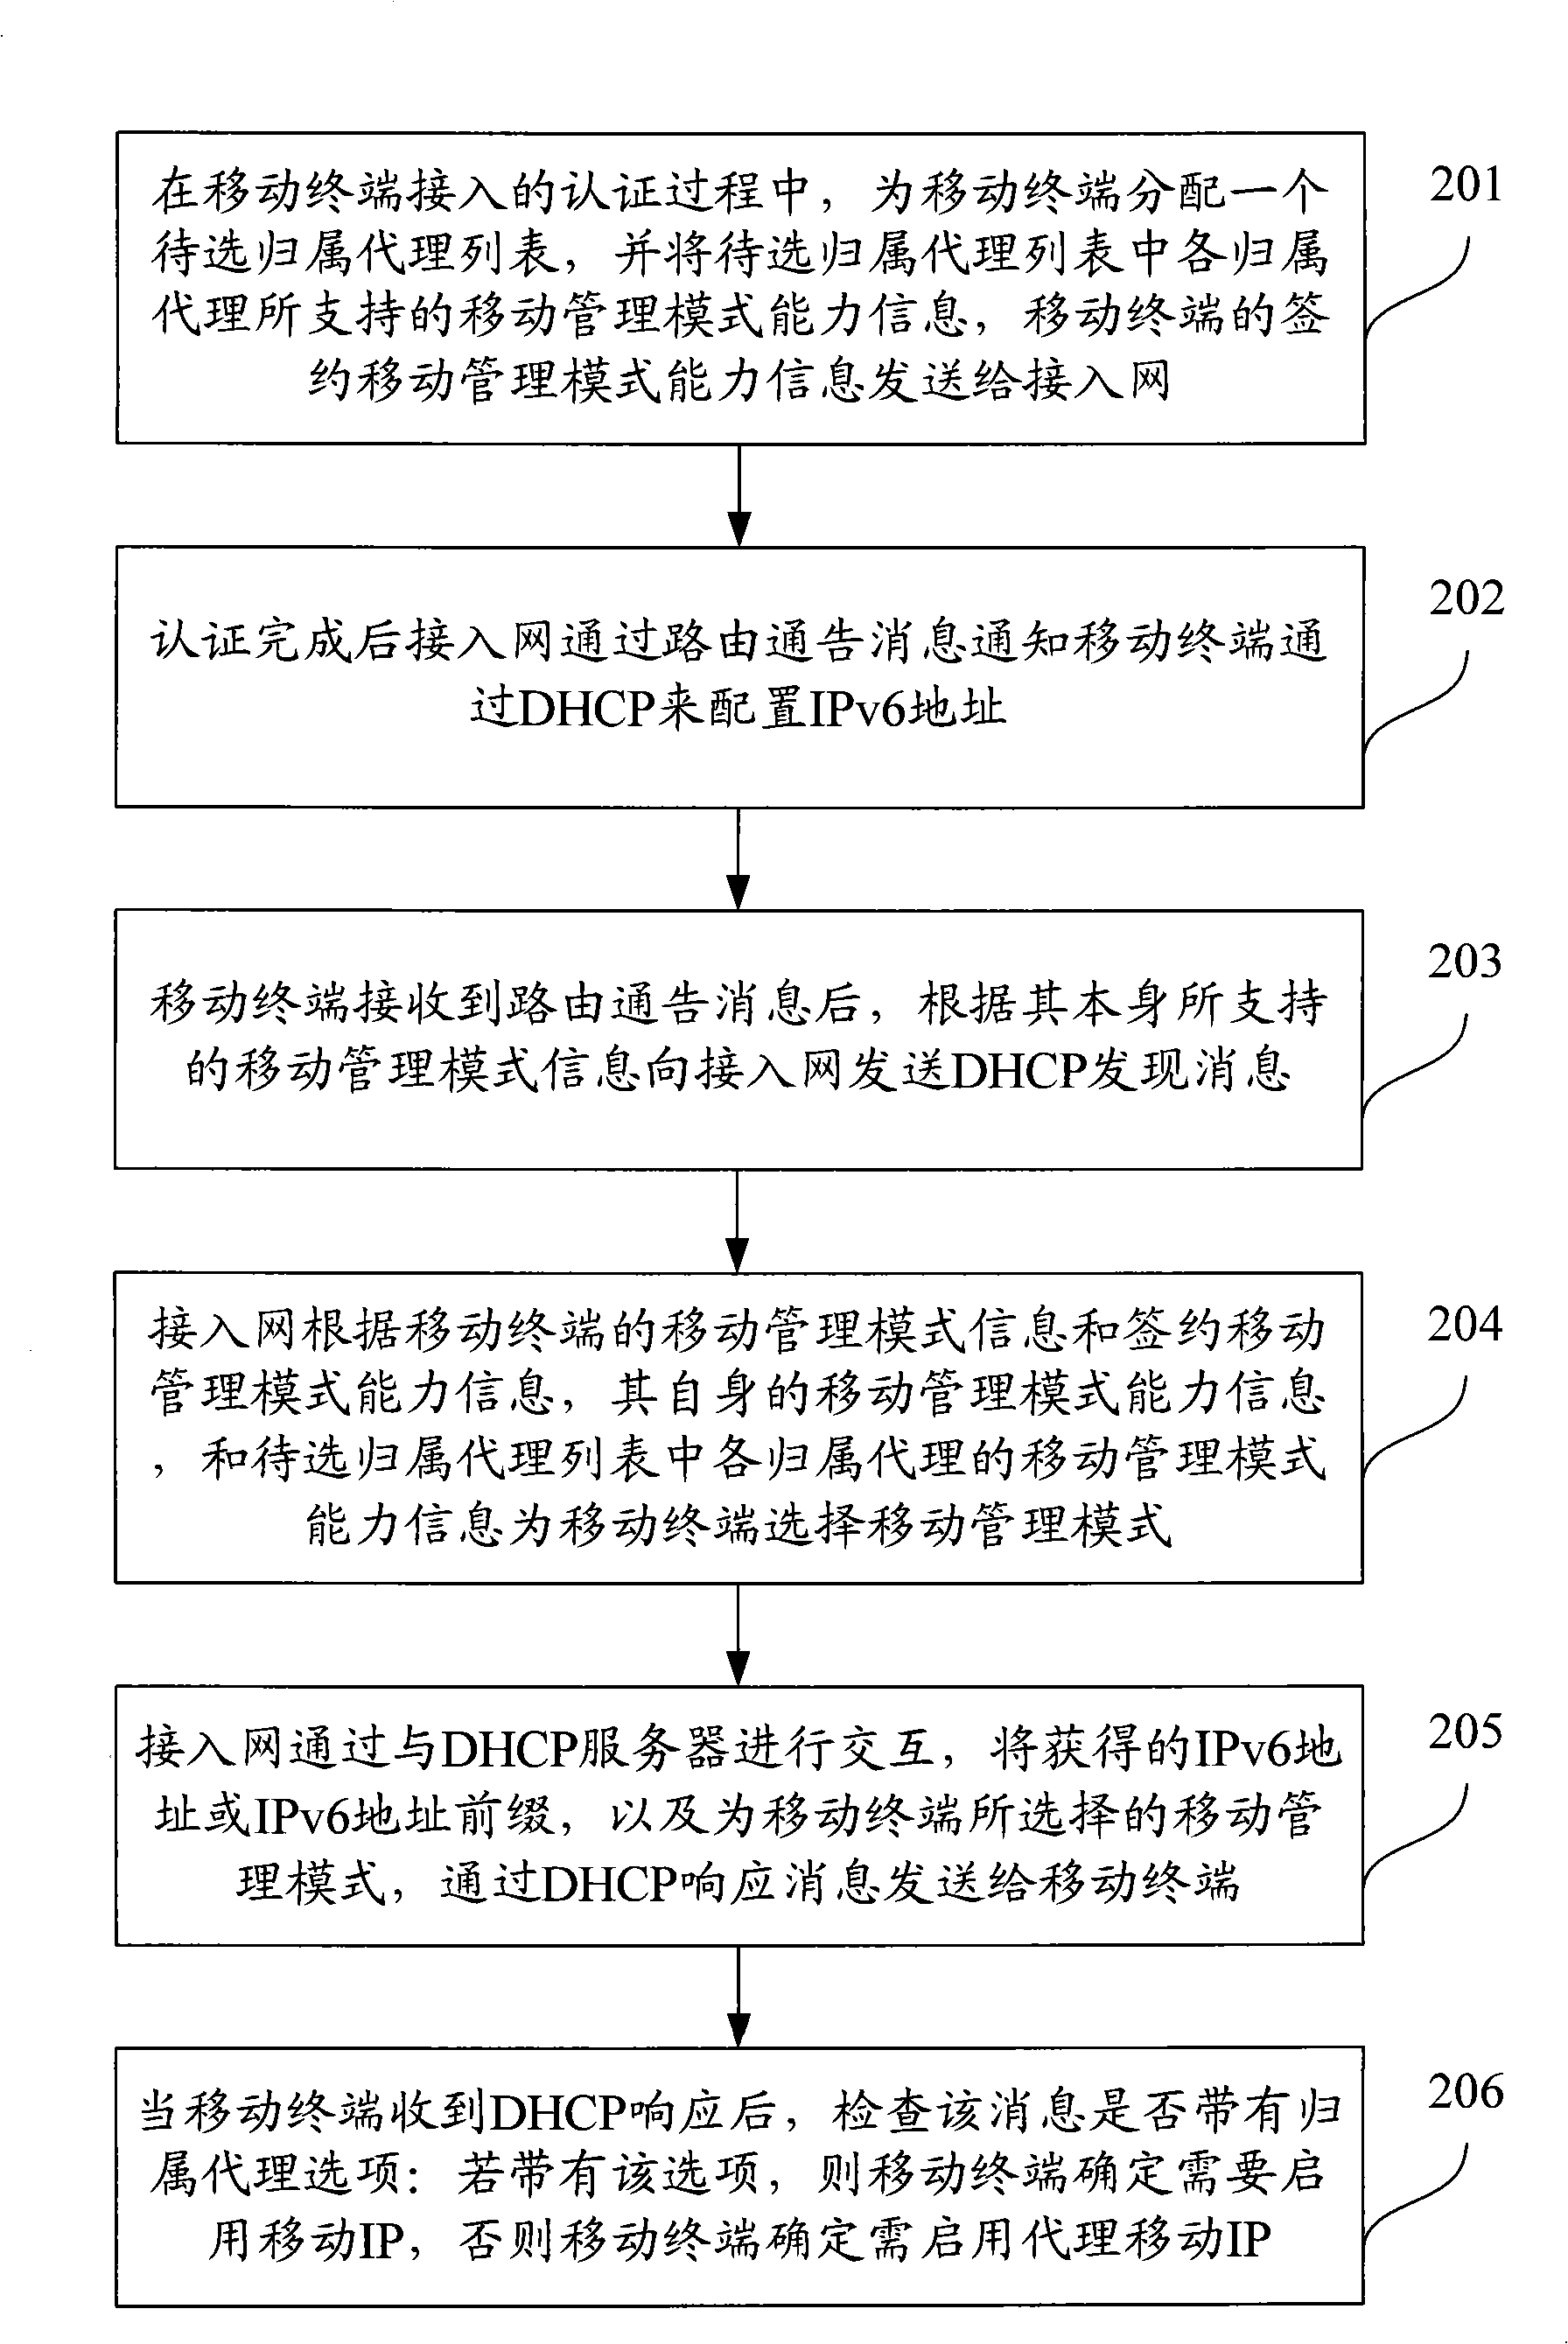 Method for selecting mobile management mode in wireless network